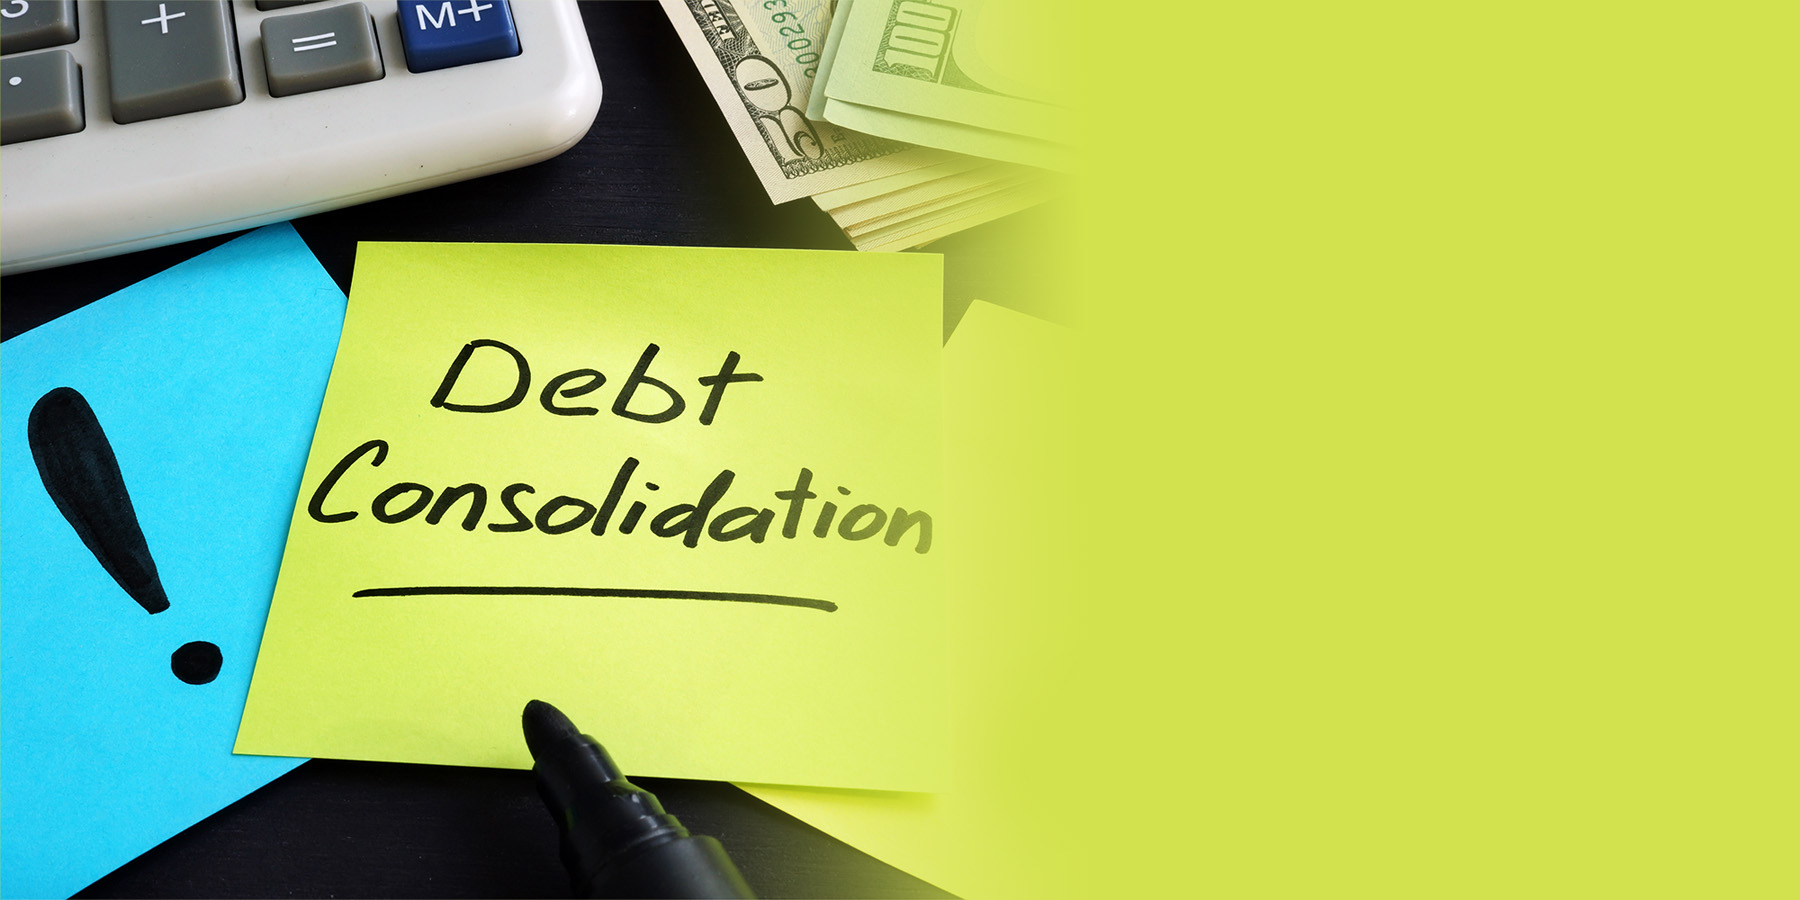 Debt Consolidation Loan Promotion